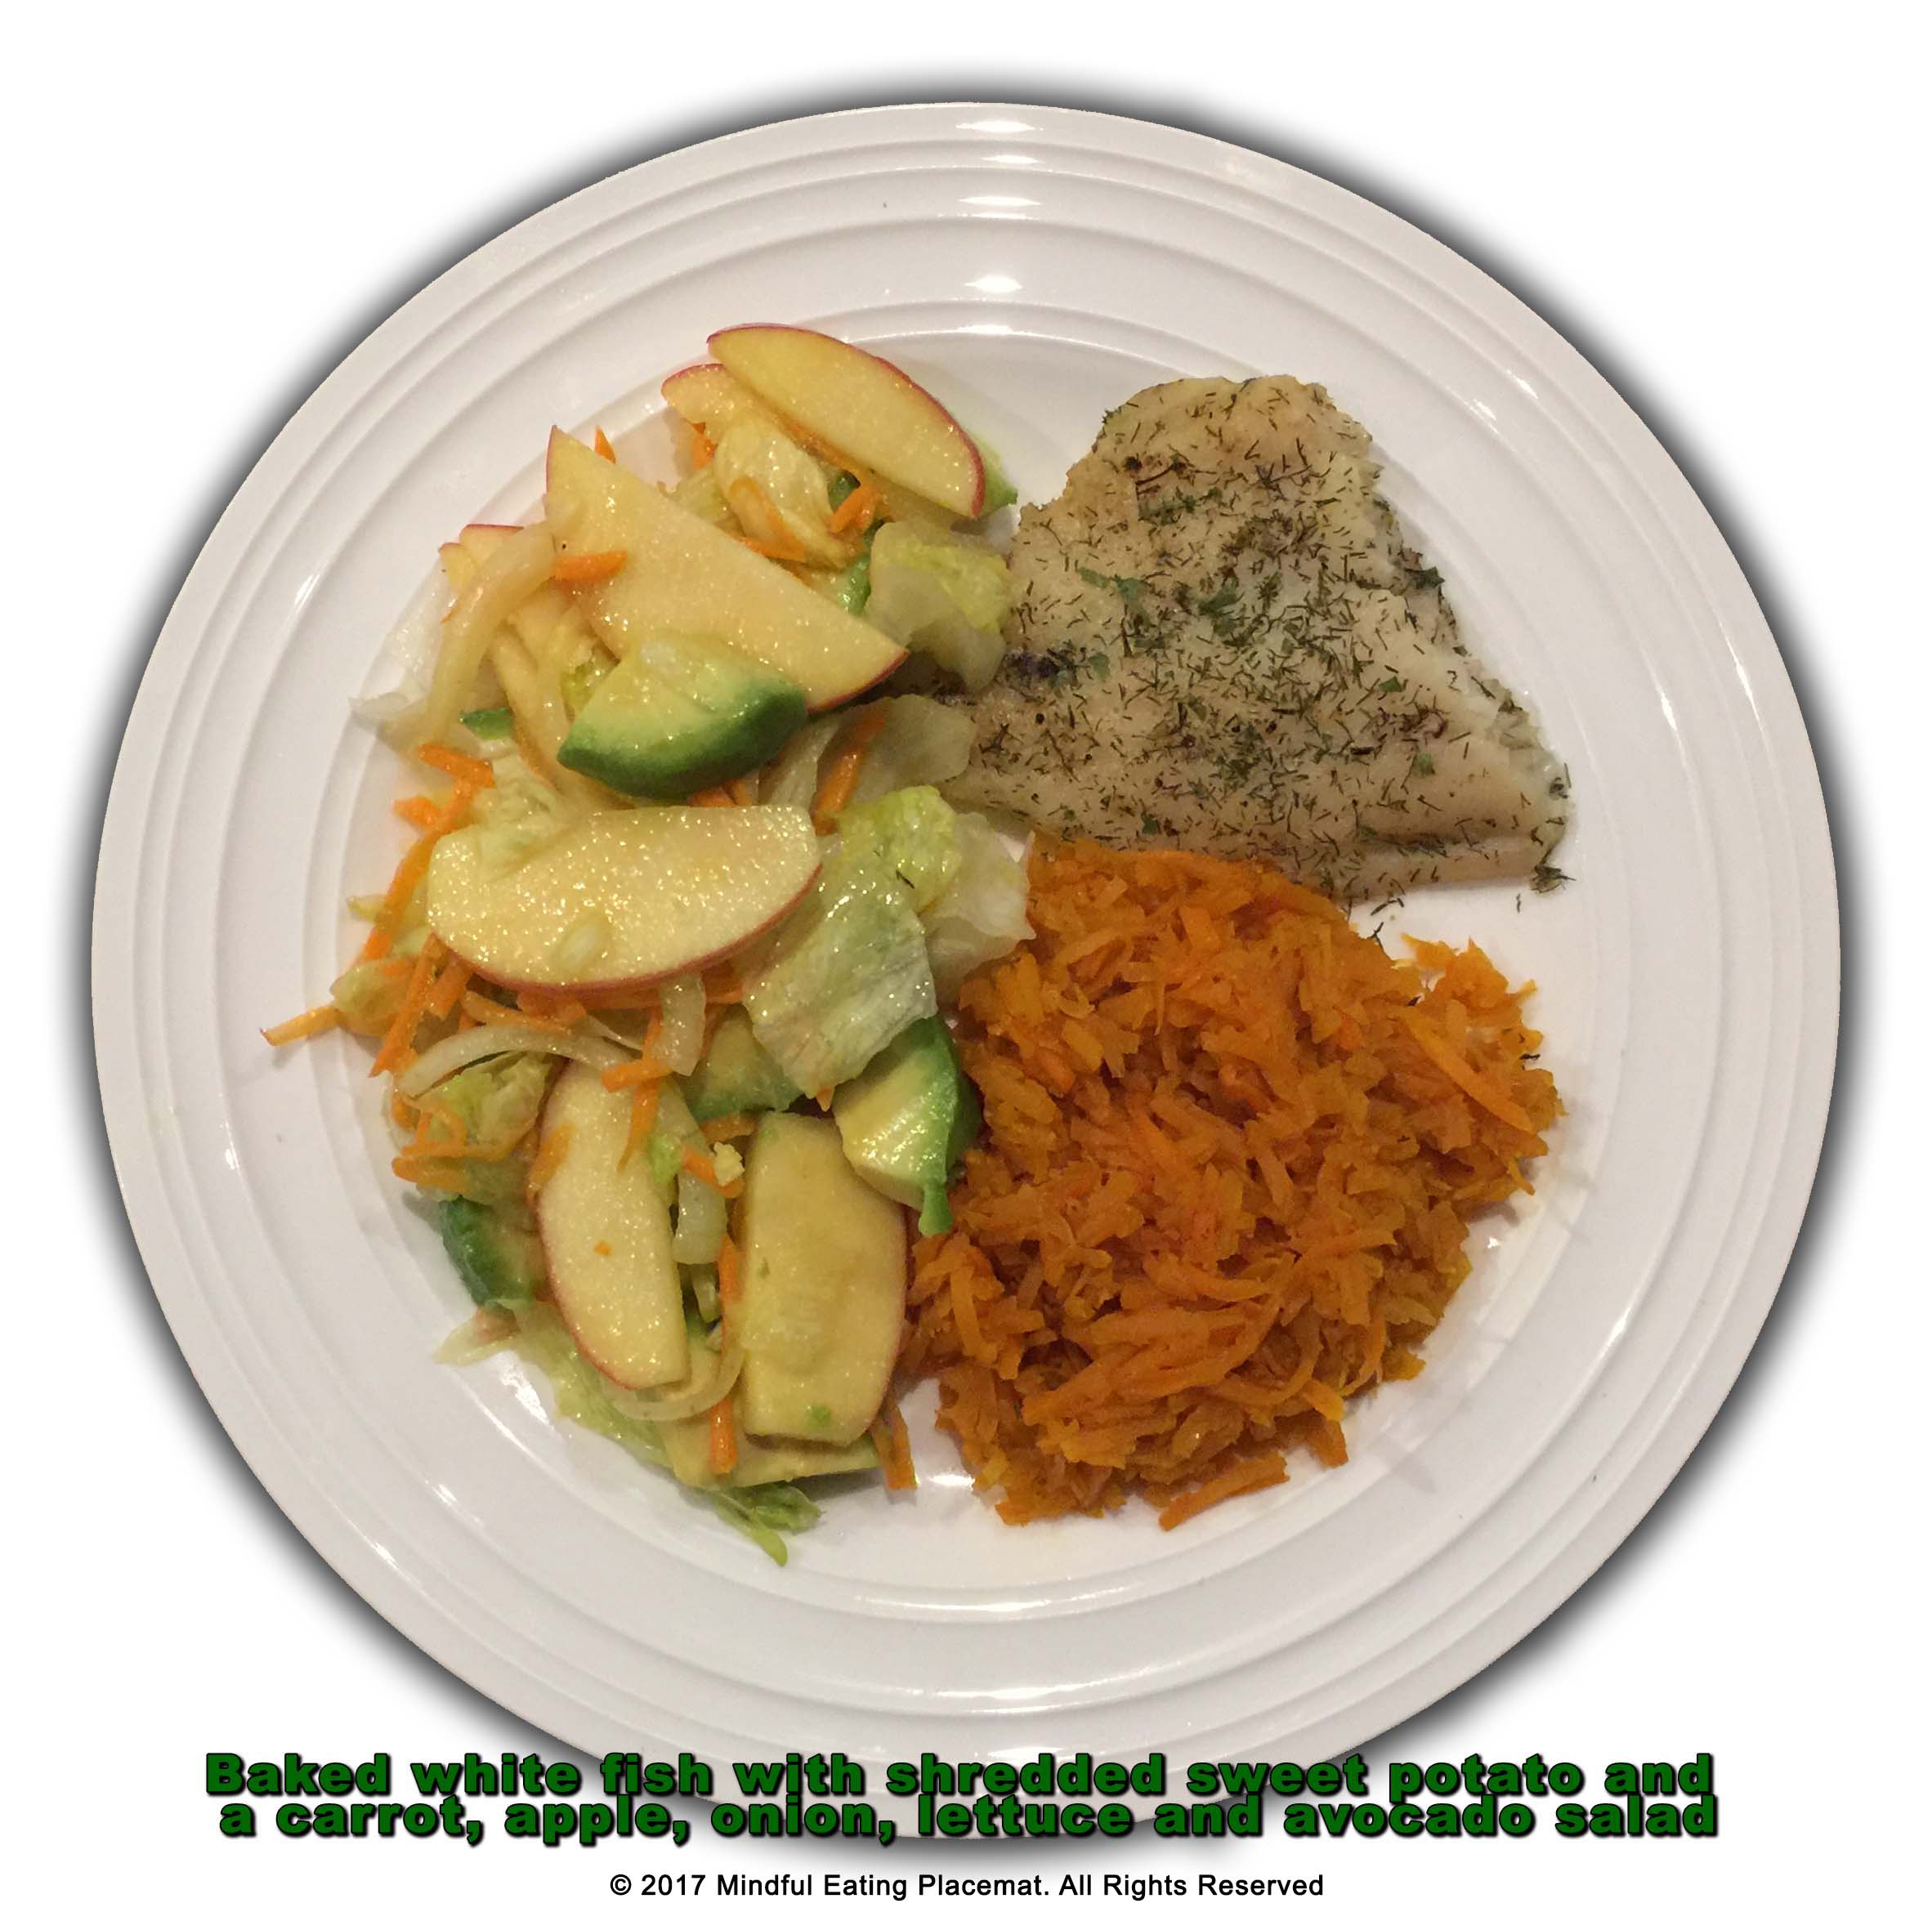 Baked fish with shredded sweet potato and carrot with side salad